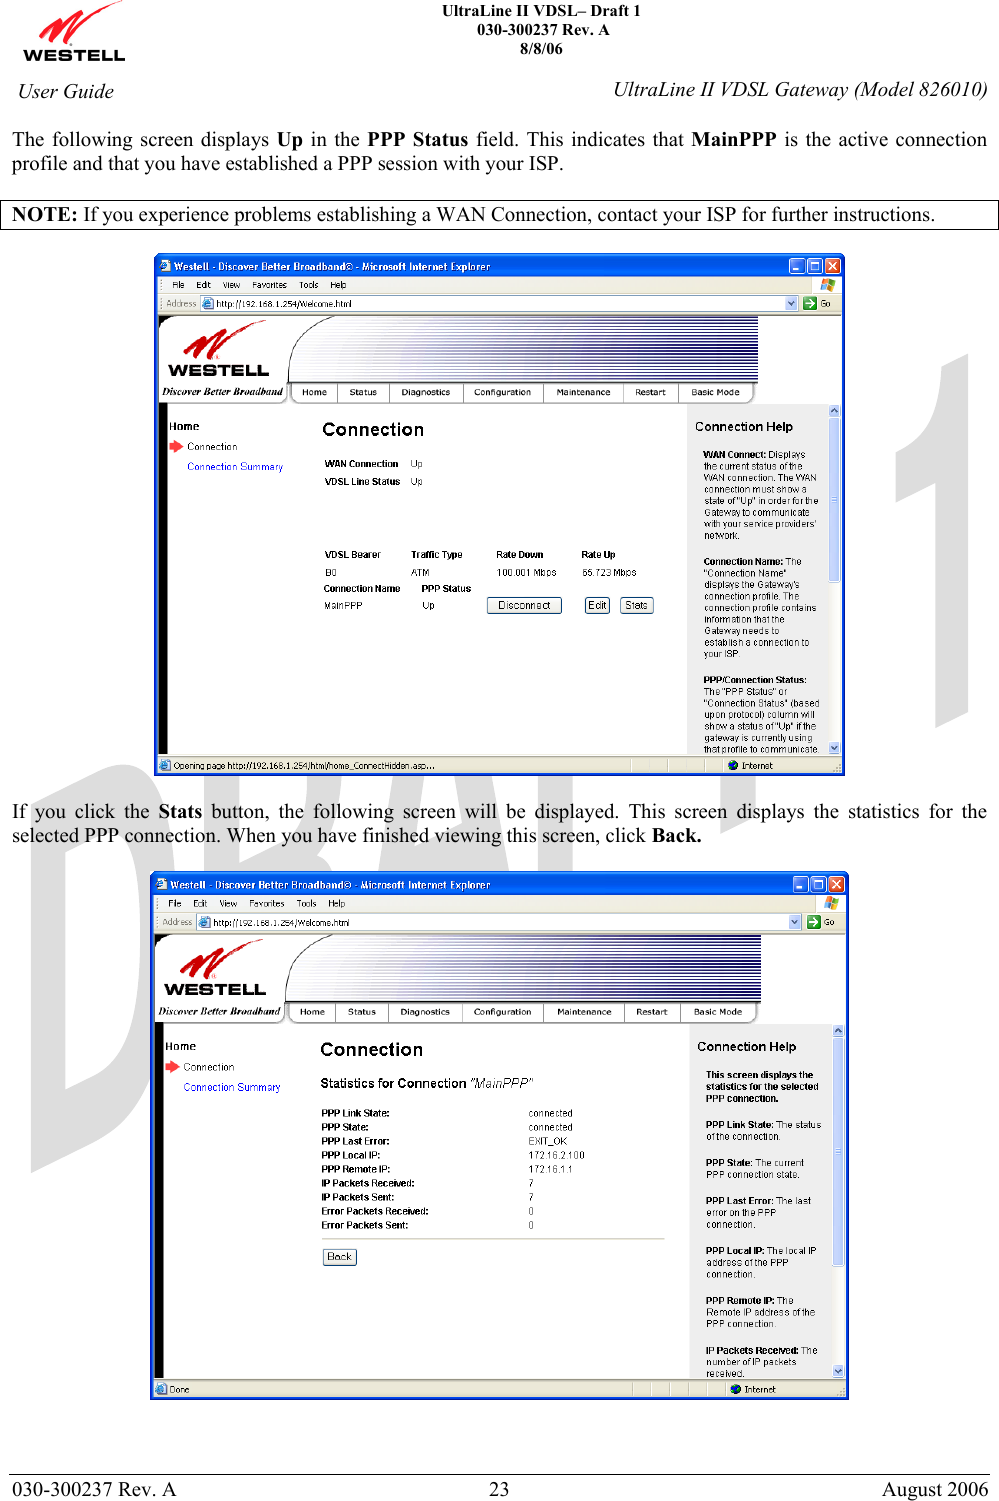    UltraLine II VDSL– Draft 1  030-300237 Rev. A 8/8/06   030-300237 Rev. A  23  August 2006  User Guide  UltraLine II VDSL Gateway (Model 826010) The following screen displays Up in the PPP Status field. This indicates that MainPPP is the active connection profile and that you have established a PPP session with your ISP.   NOTE: If you experience problems establishing a WAN Connection, contact your ISP for further instructions.    If you click the Stats button, the following screen will be displayed. This screen displays the statistics for the selected PPP connection. When you have finished viewing this screen, click Back.      